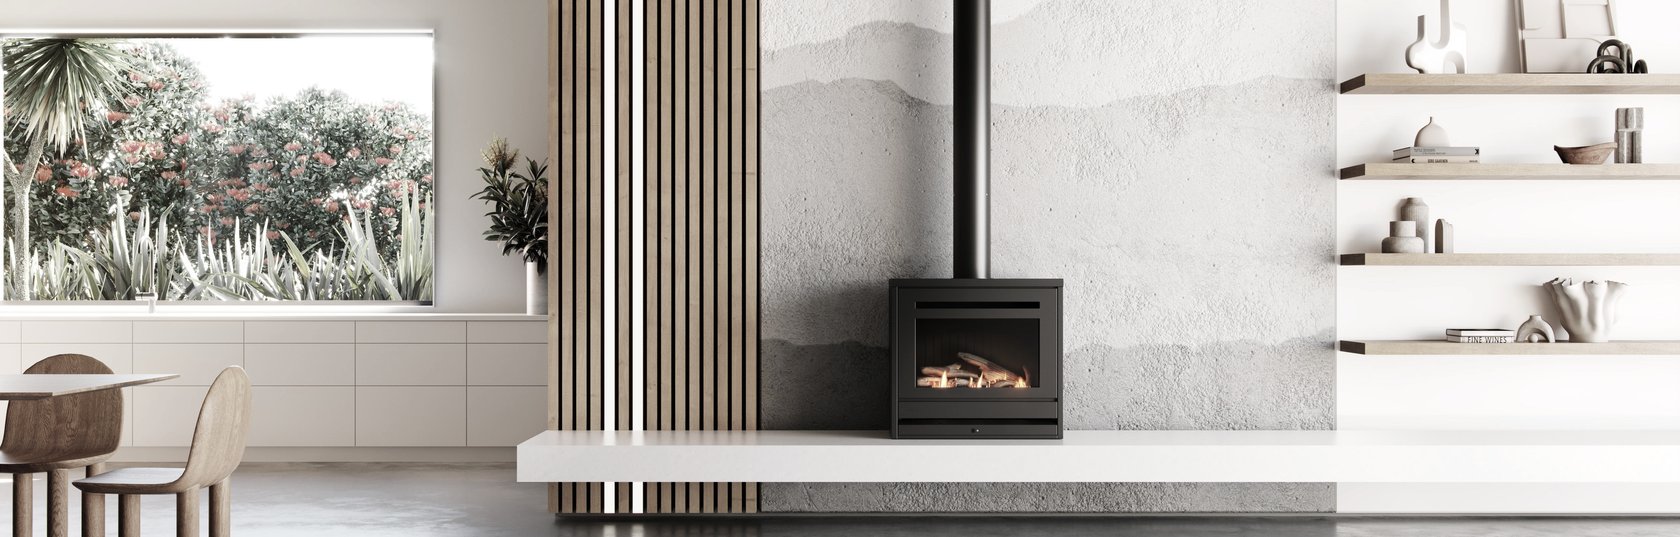 Beautifully designed, Wi-Fi enabled, energy efficient: Rinnai’s newest fireplace